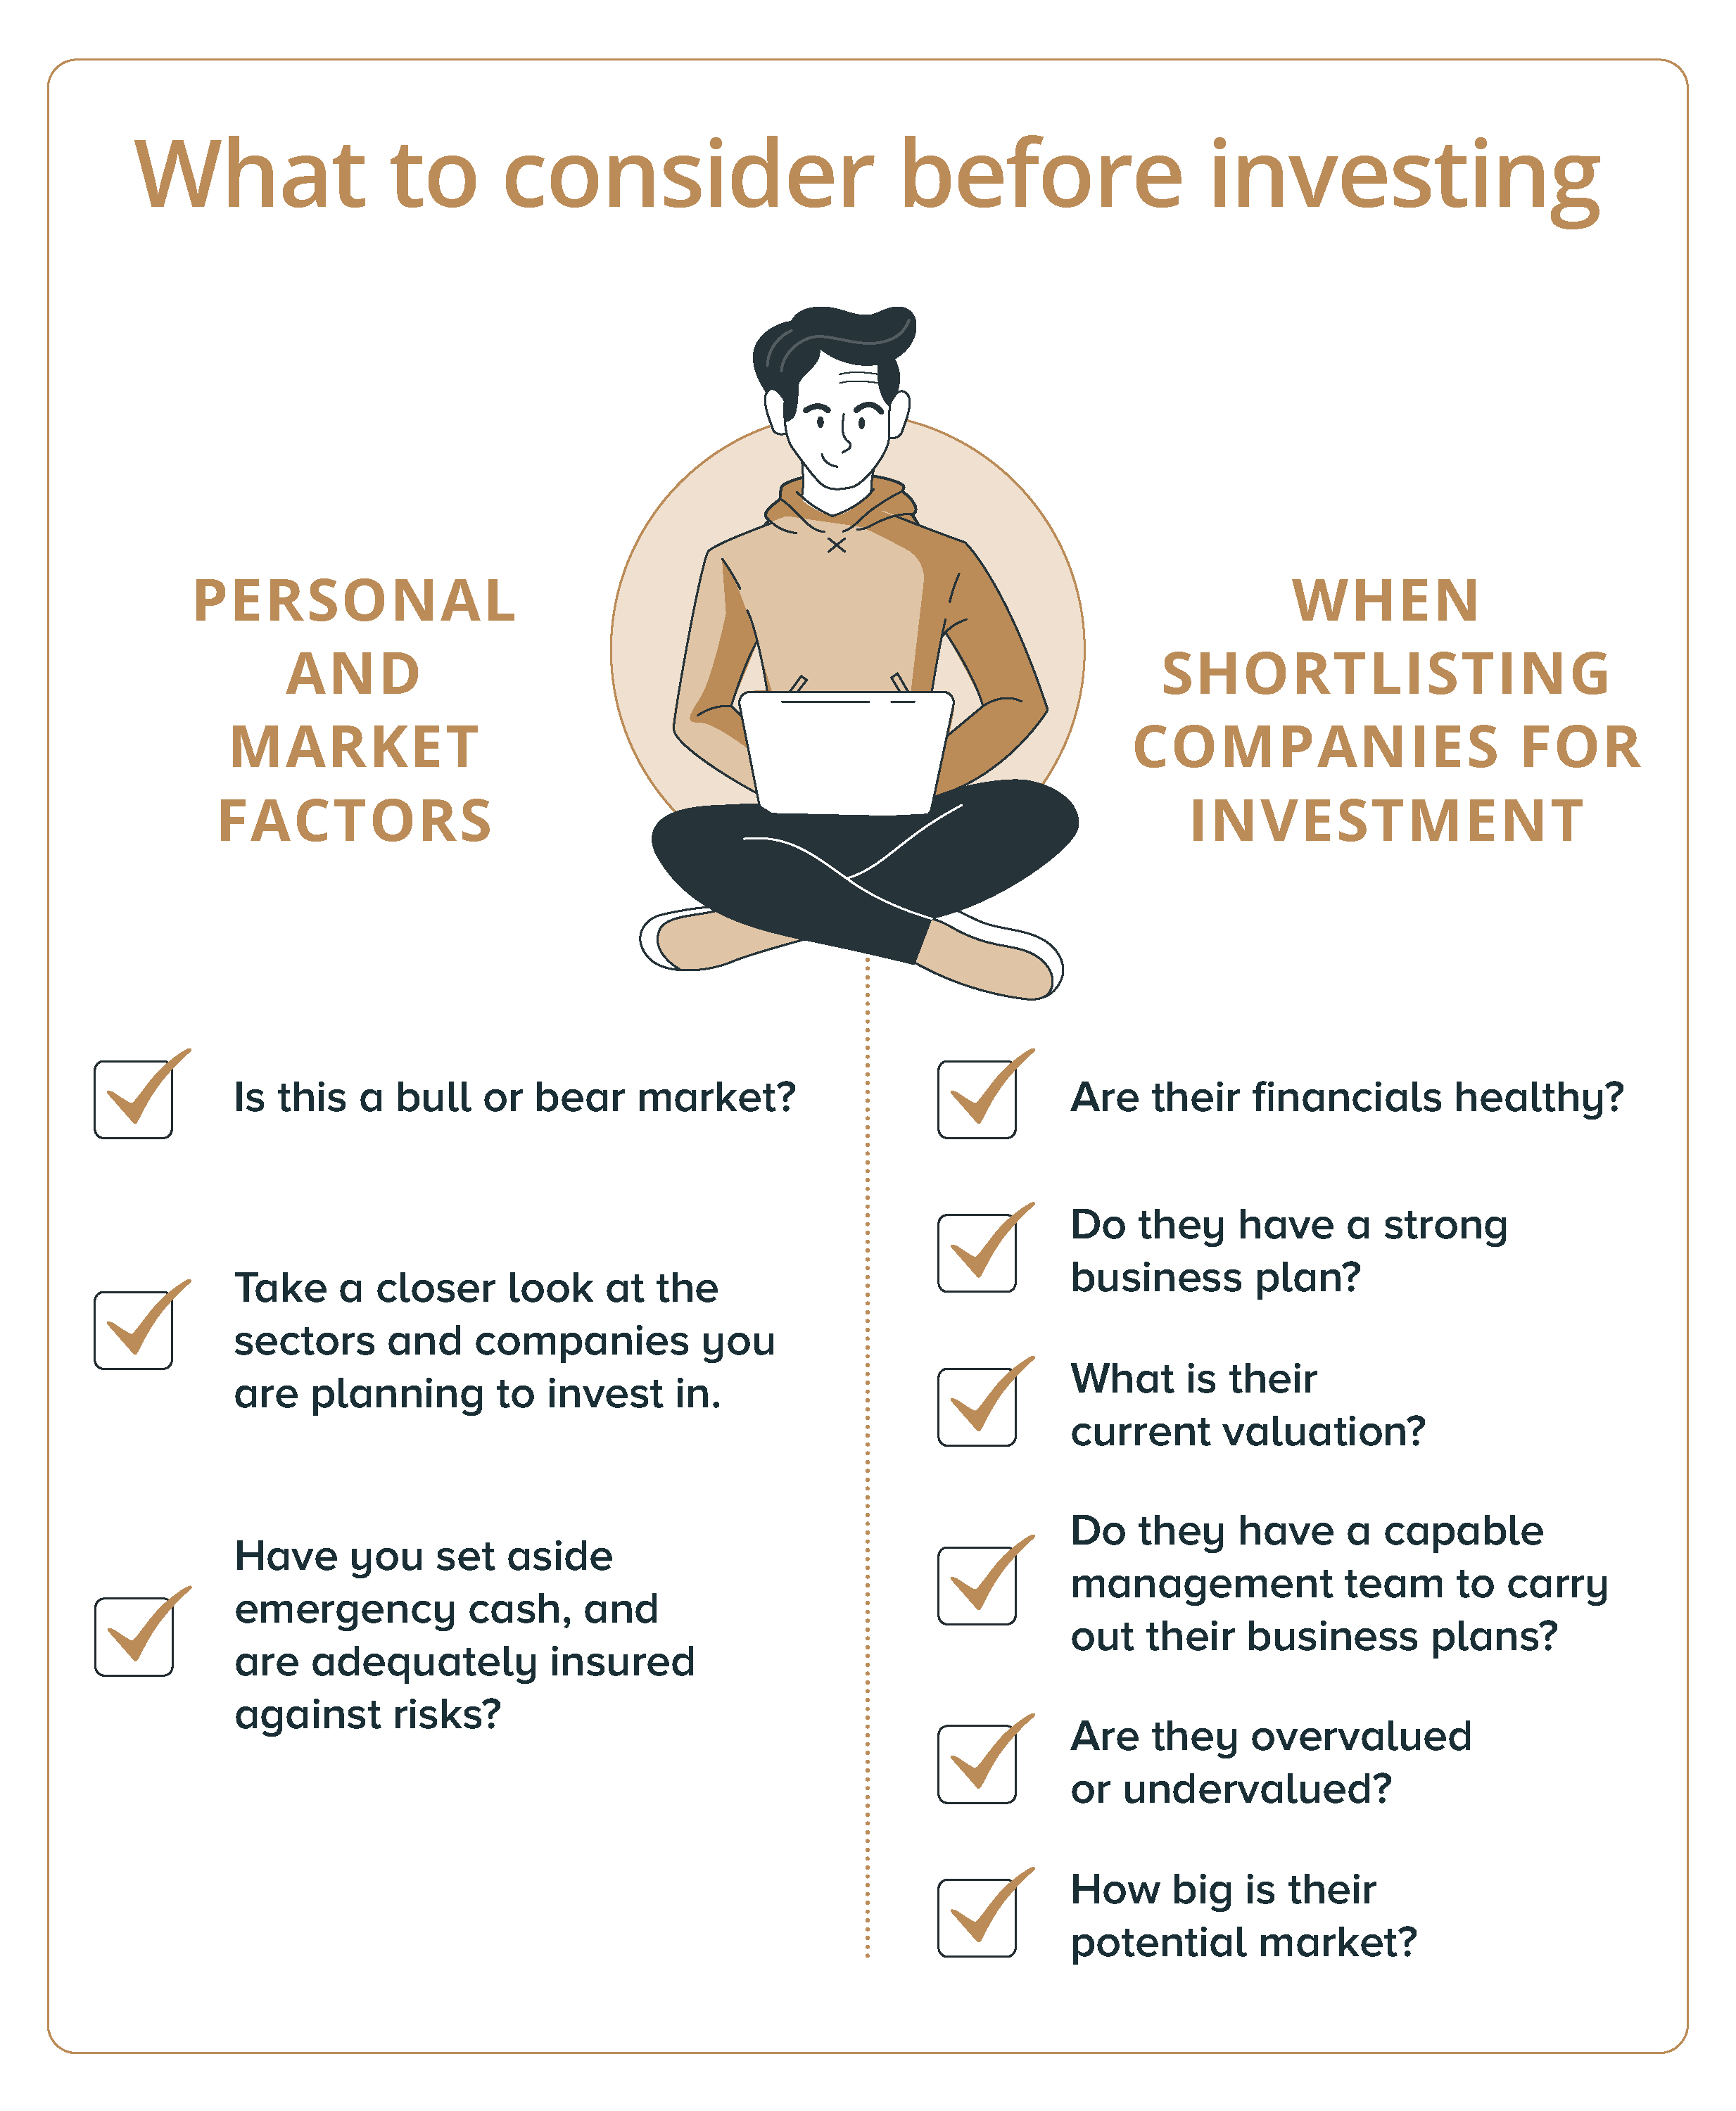 Personal and market factors to consider when short-listing companies for investment